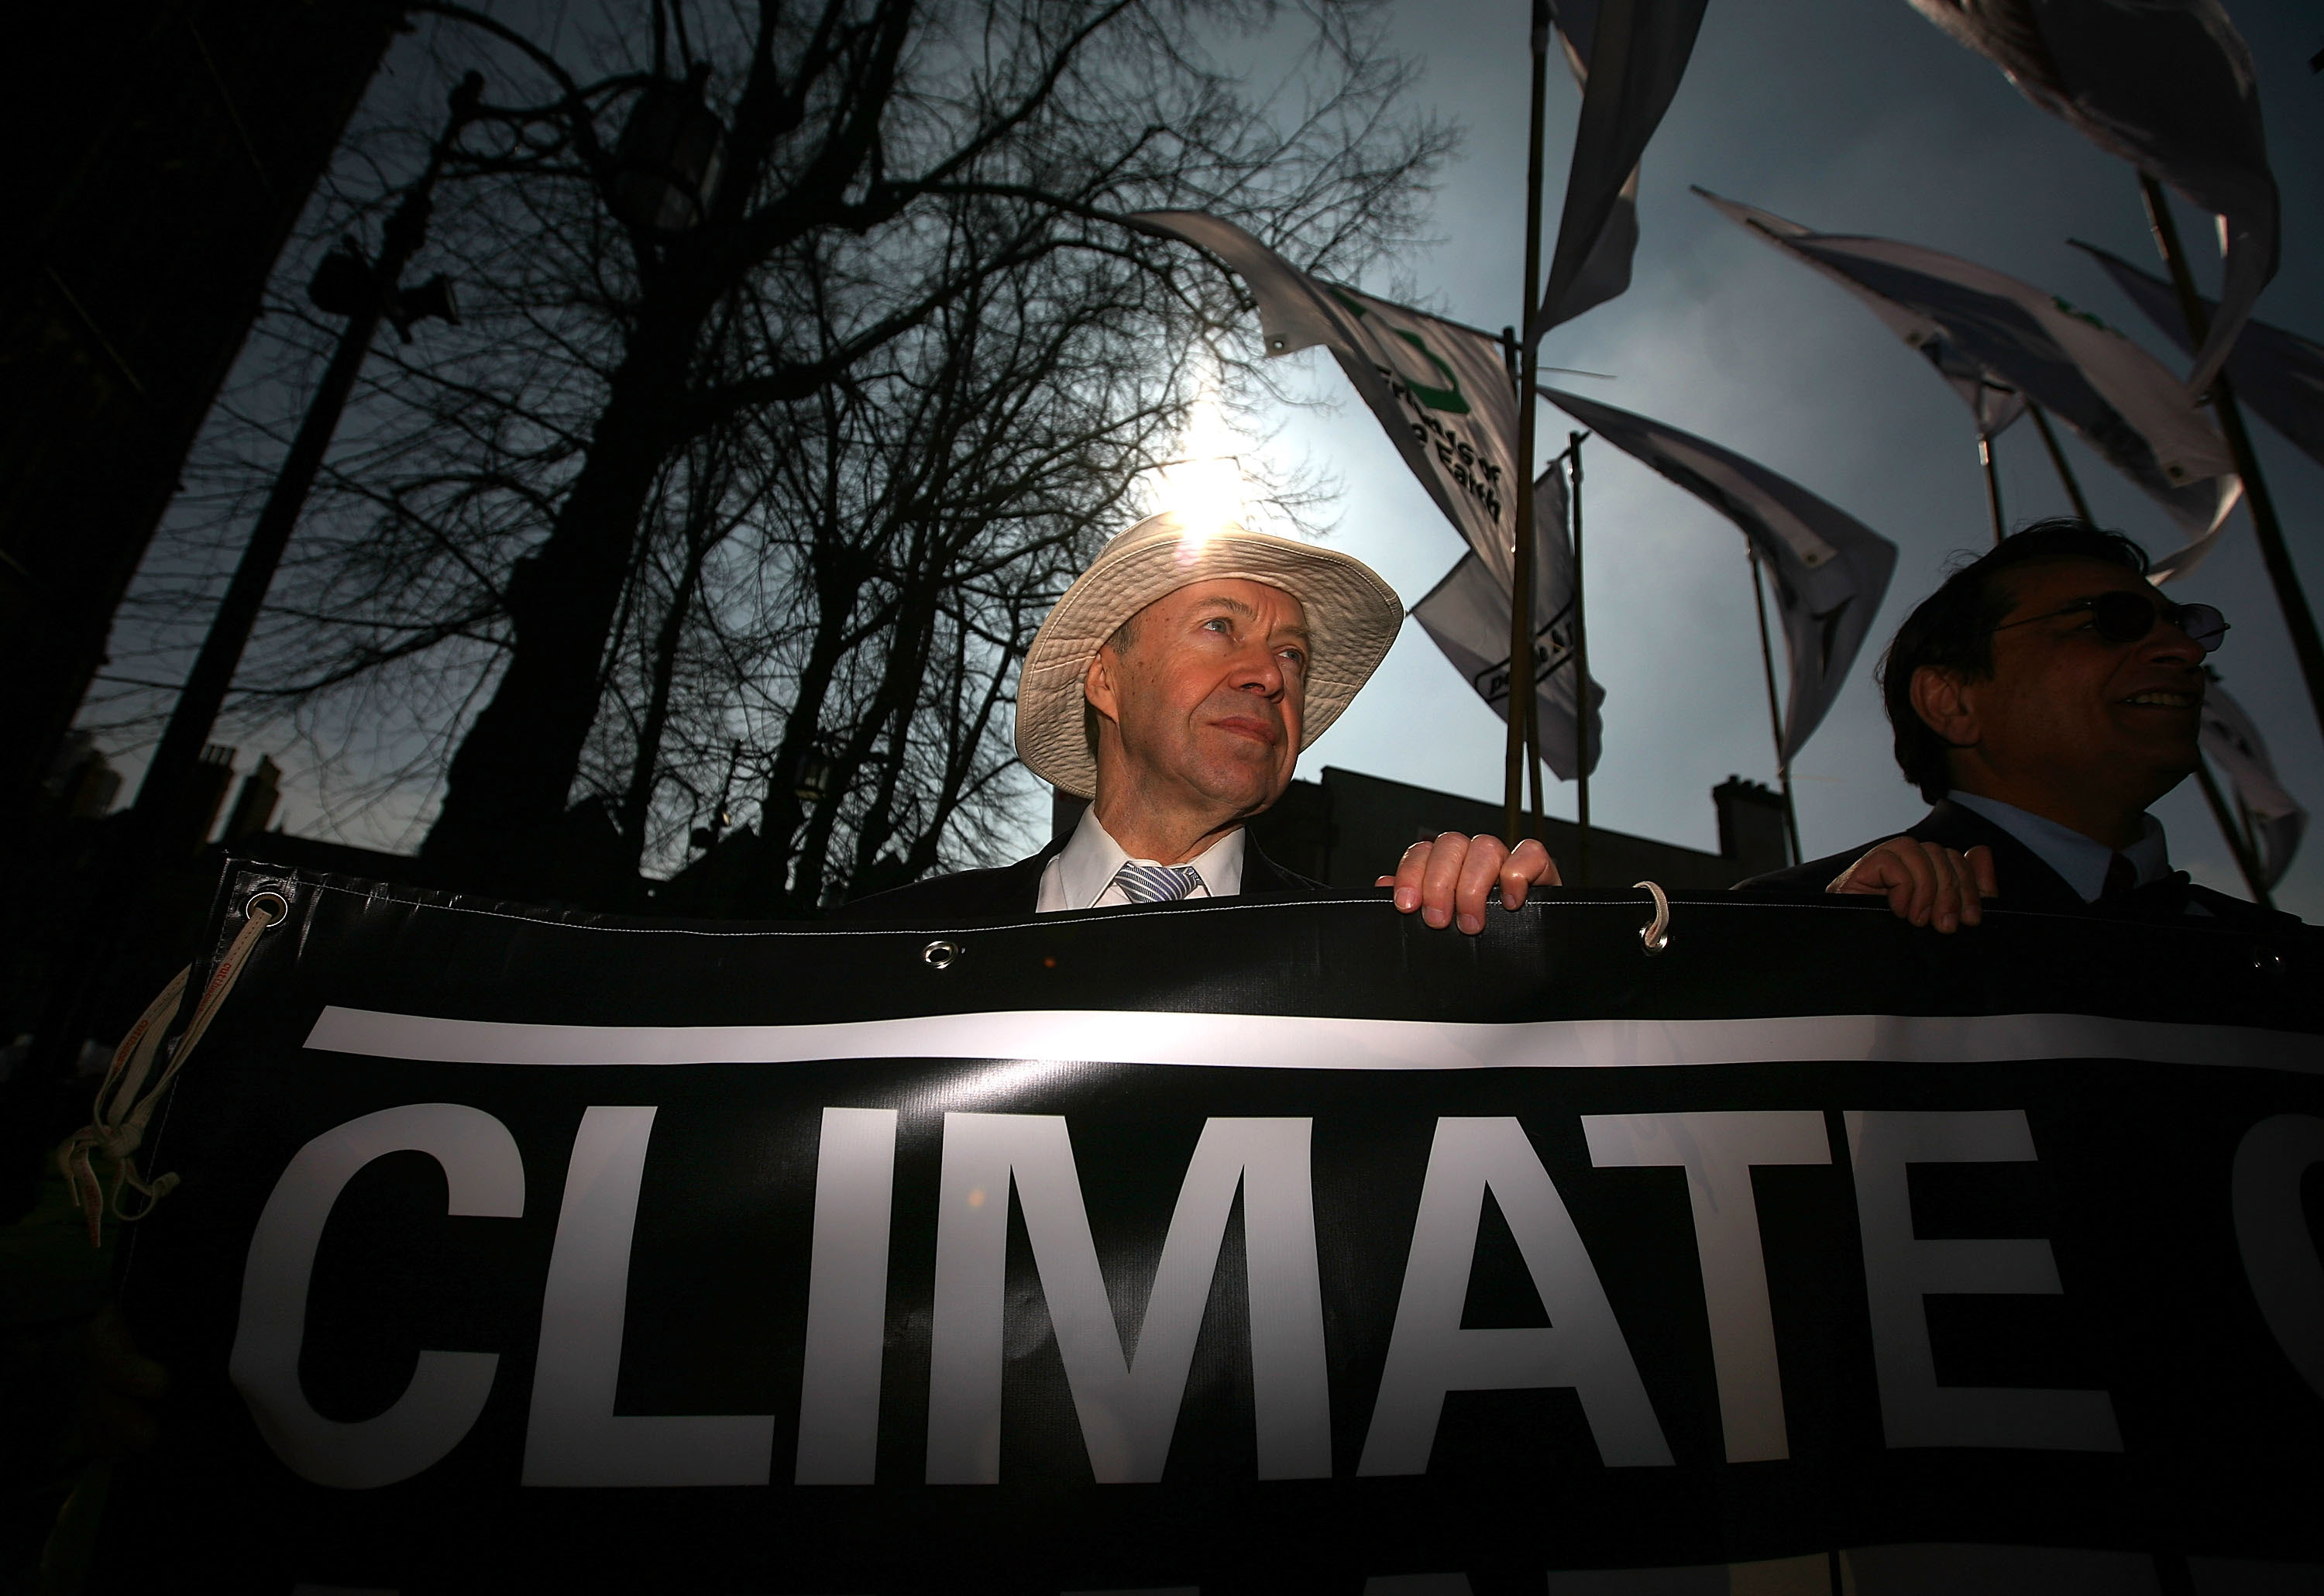 Scientist and climatologist James Hansen takes part in a mock funeral parade during a Climate Change Campaign Action Day on March 19, 2009 in Coventry, England. (Christopher Furlong‚Getty Images)